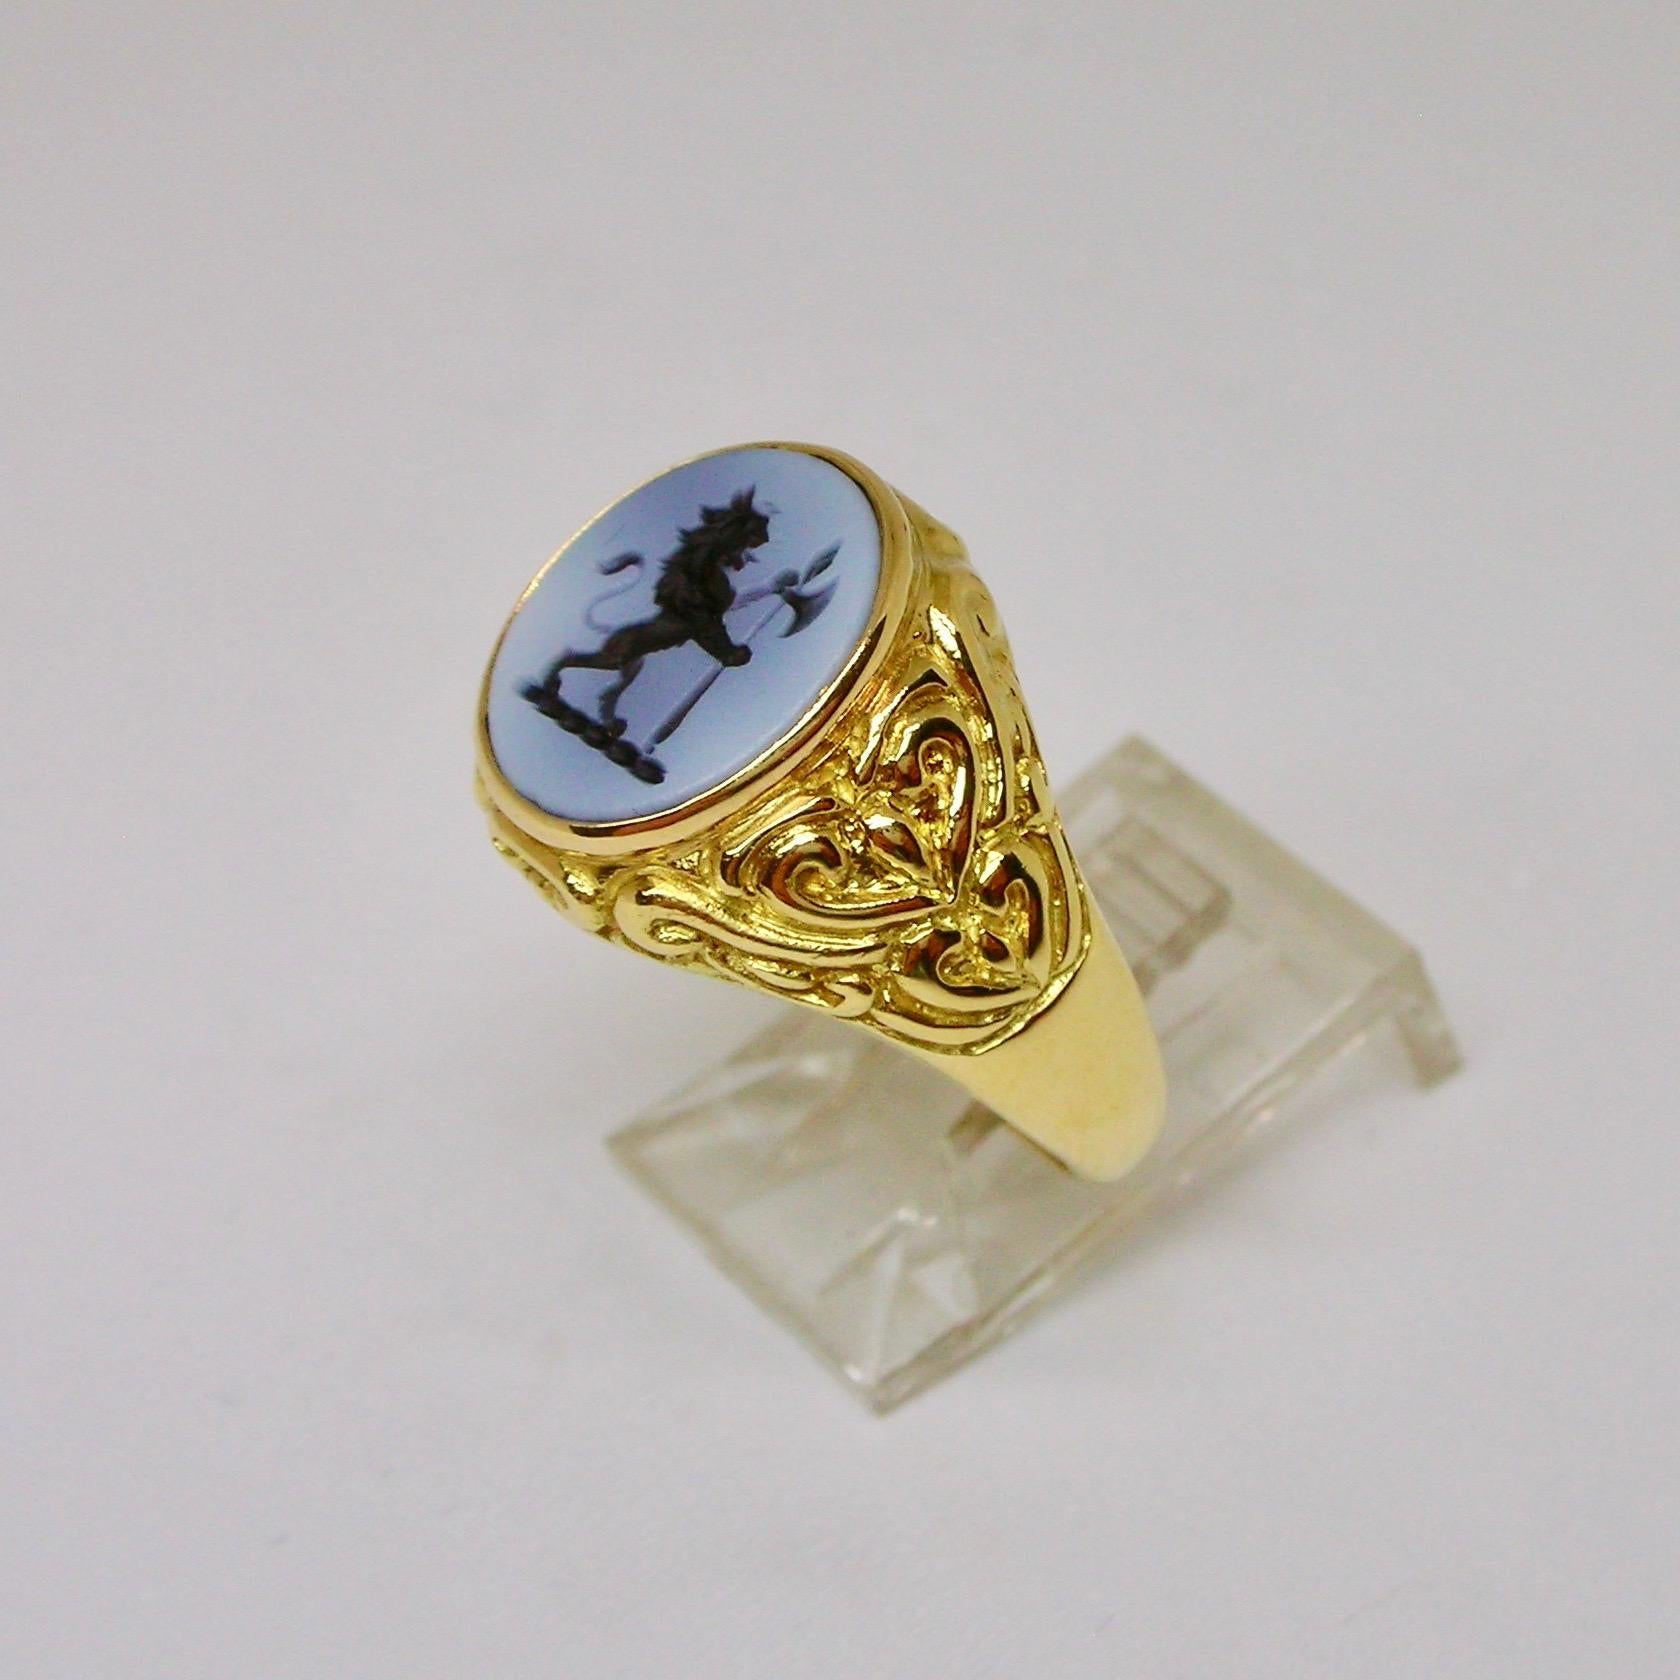 Oval Cut Antique Agate Intaglio Ring Depicting Lion For Sale